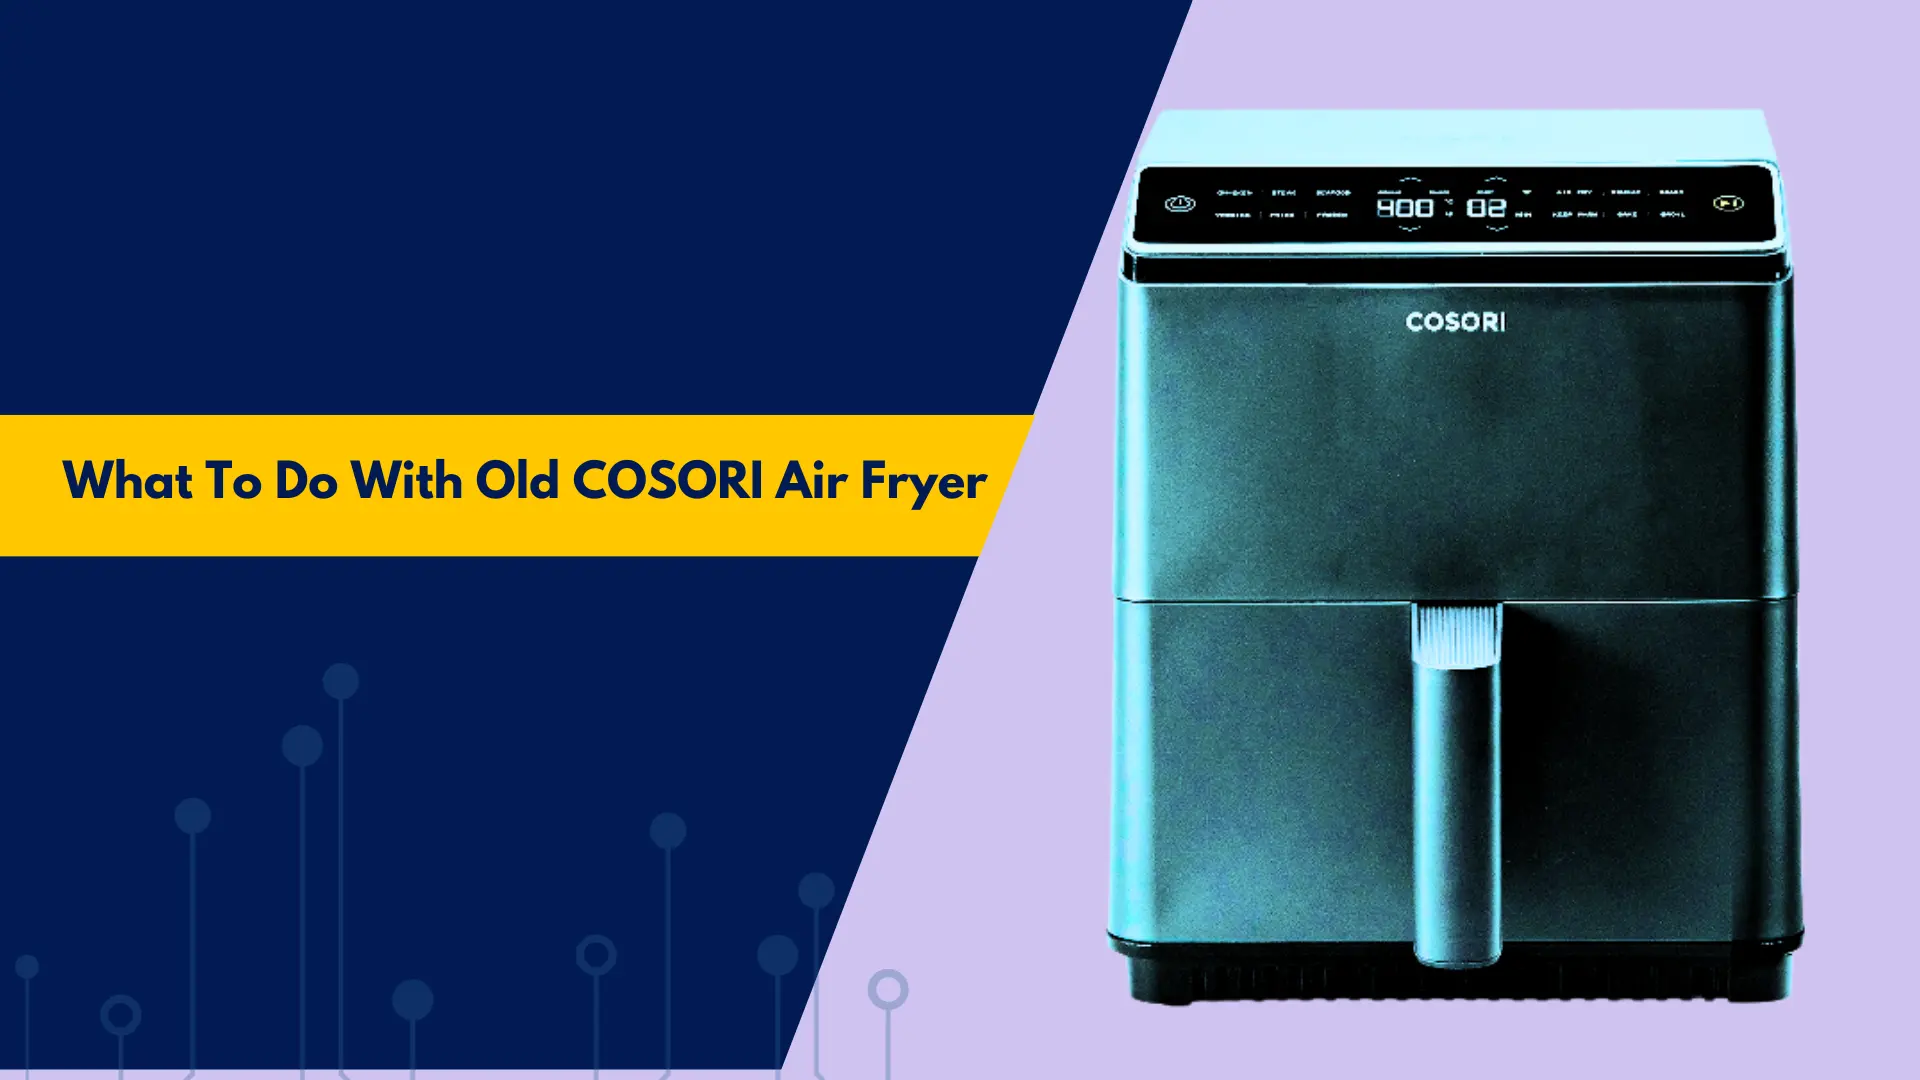 What To Do With Old COSORI Air Fryer